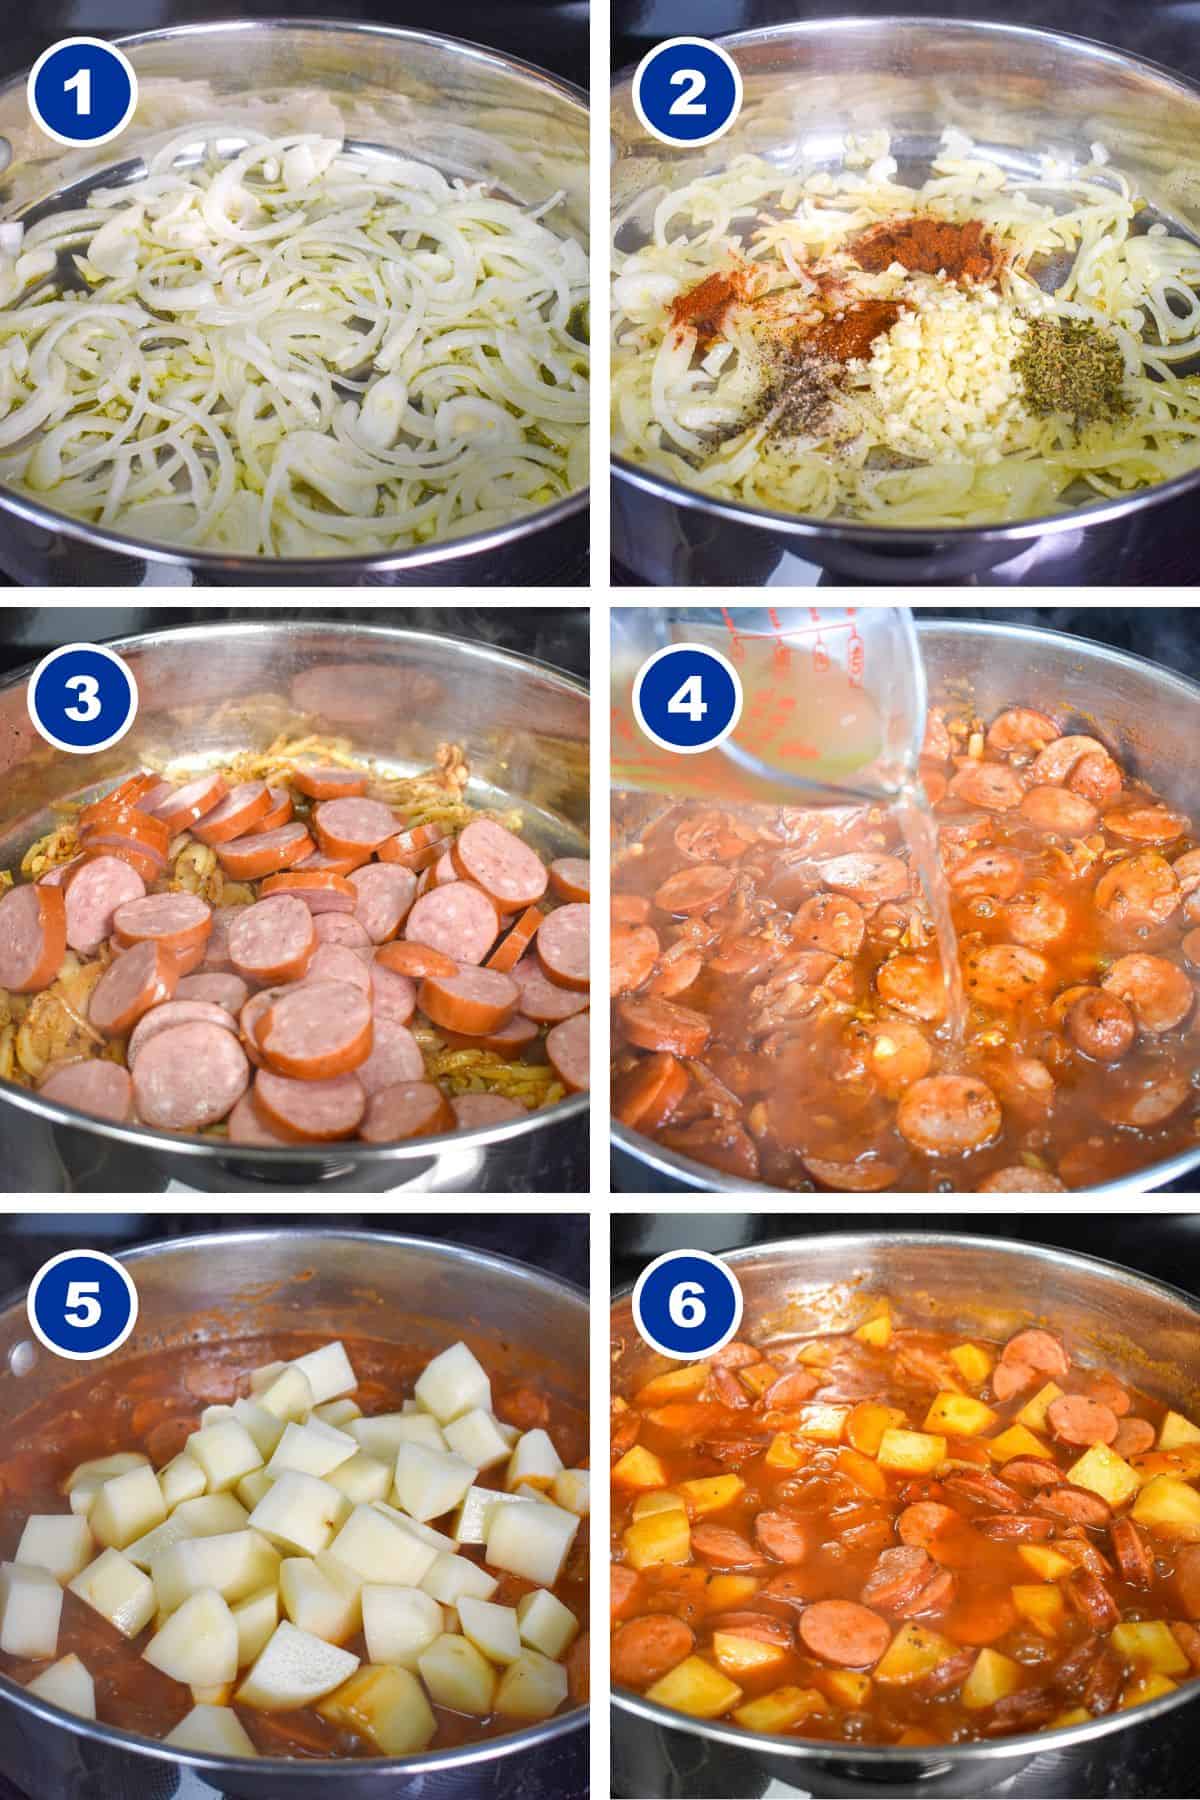 A collage of six images showing the steps to making the sausage and potatoes dish with each step labeled with white and blue numbers.